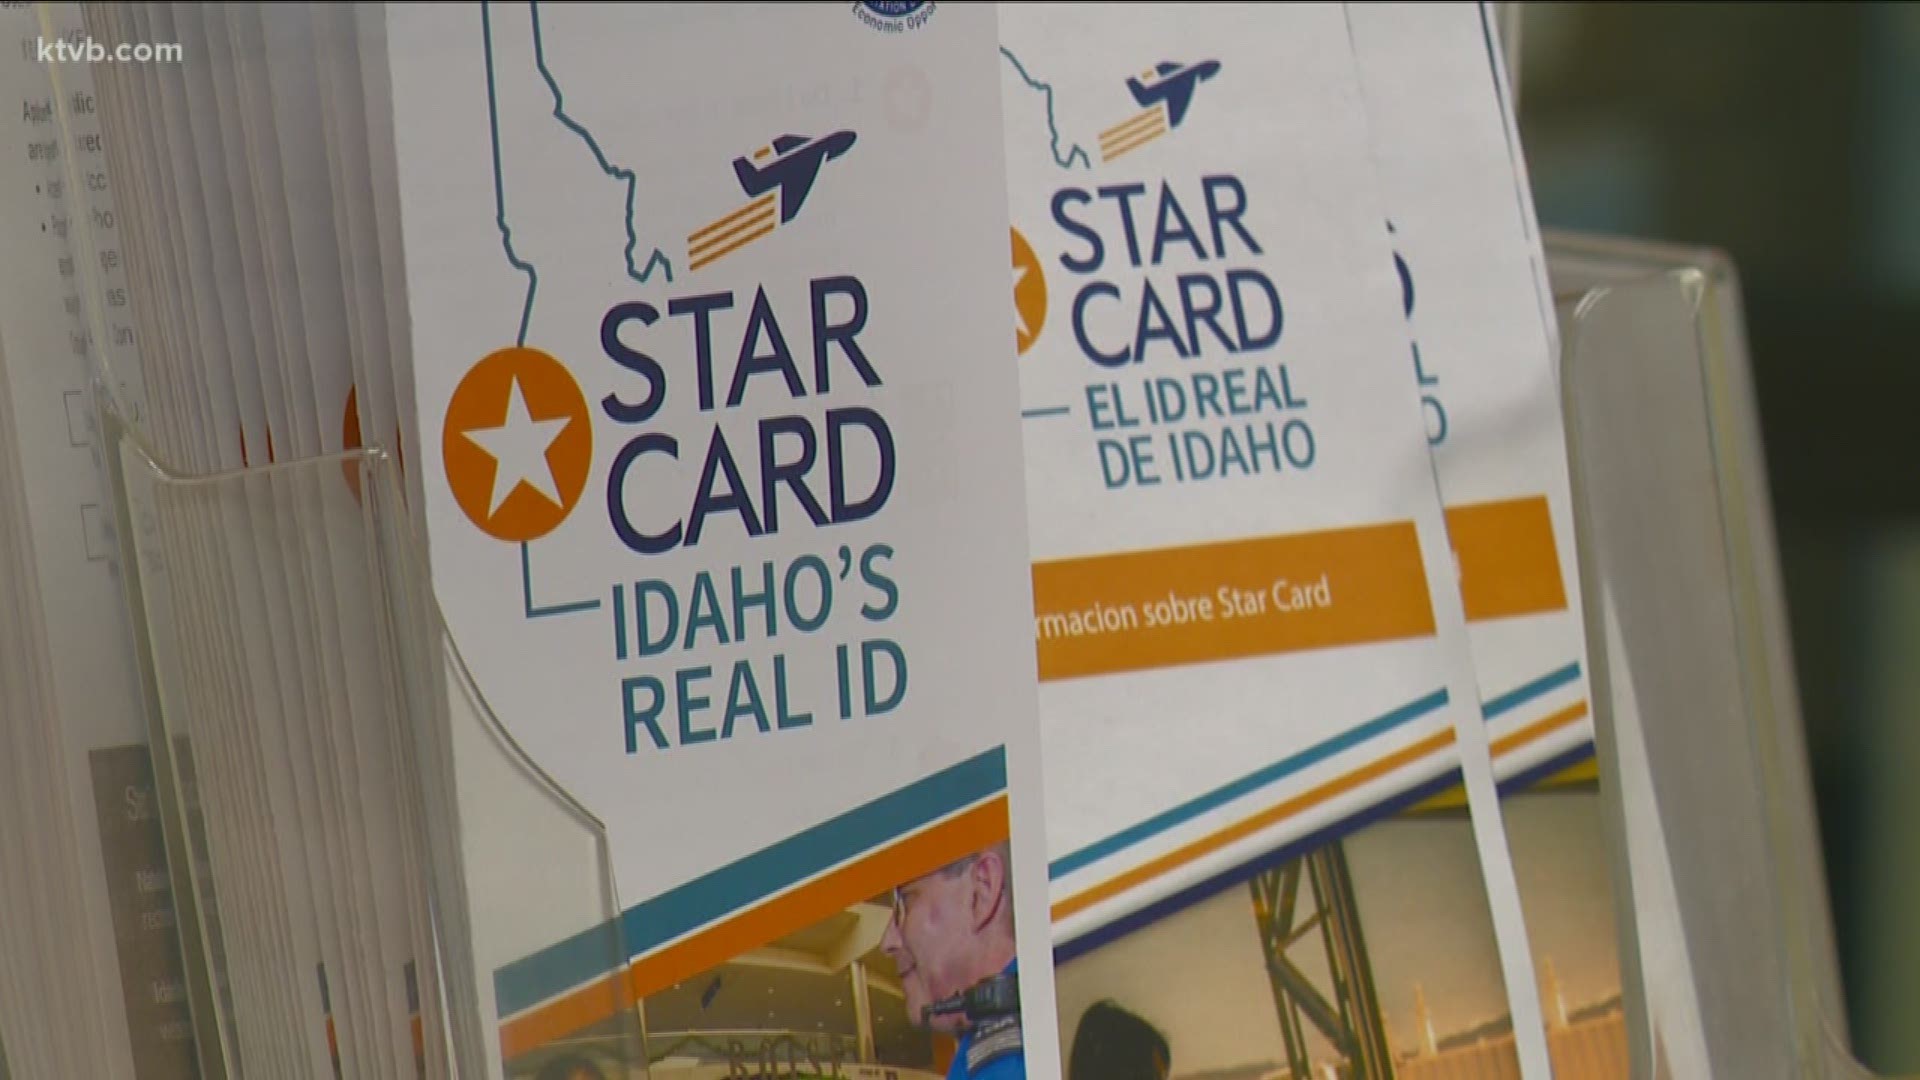 What you need to know about getting a Star Card From the personal